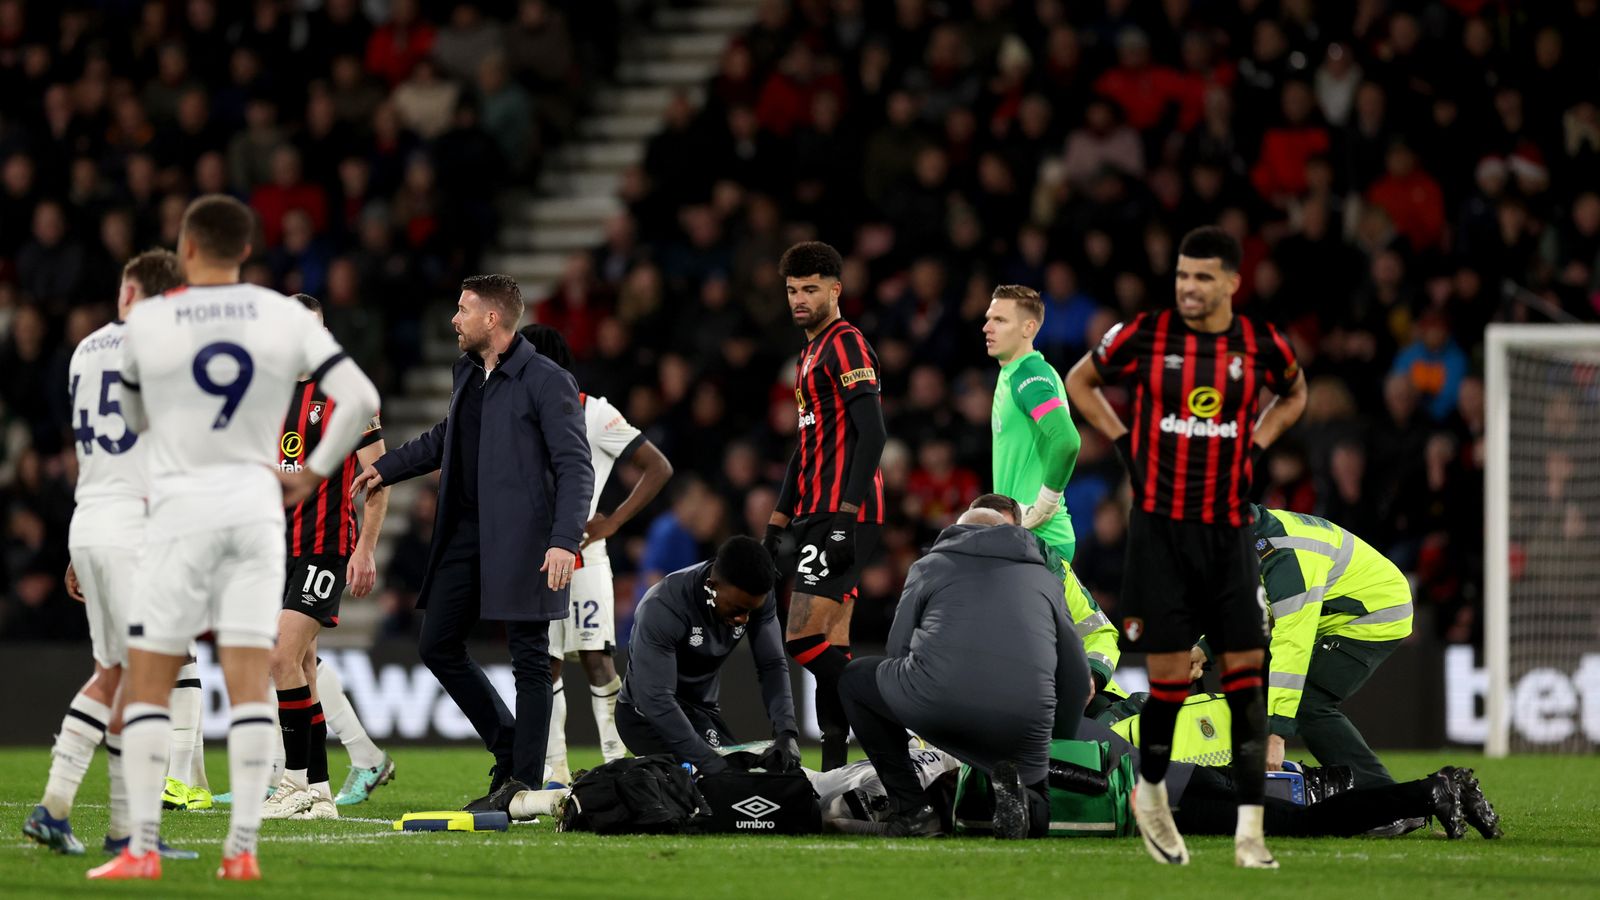 Match abandoned between Bournemouth and Luton Town after Tom Lockyer collapse to be replayed in full